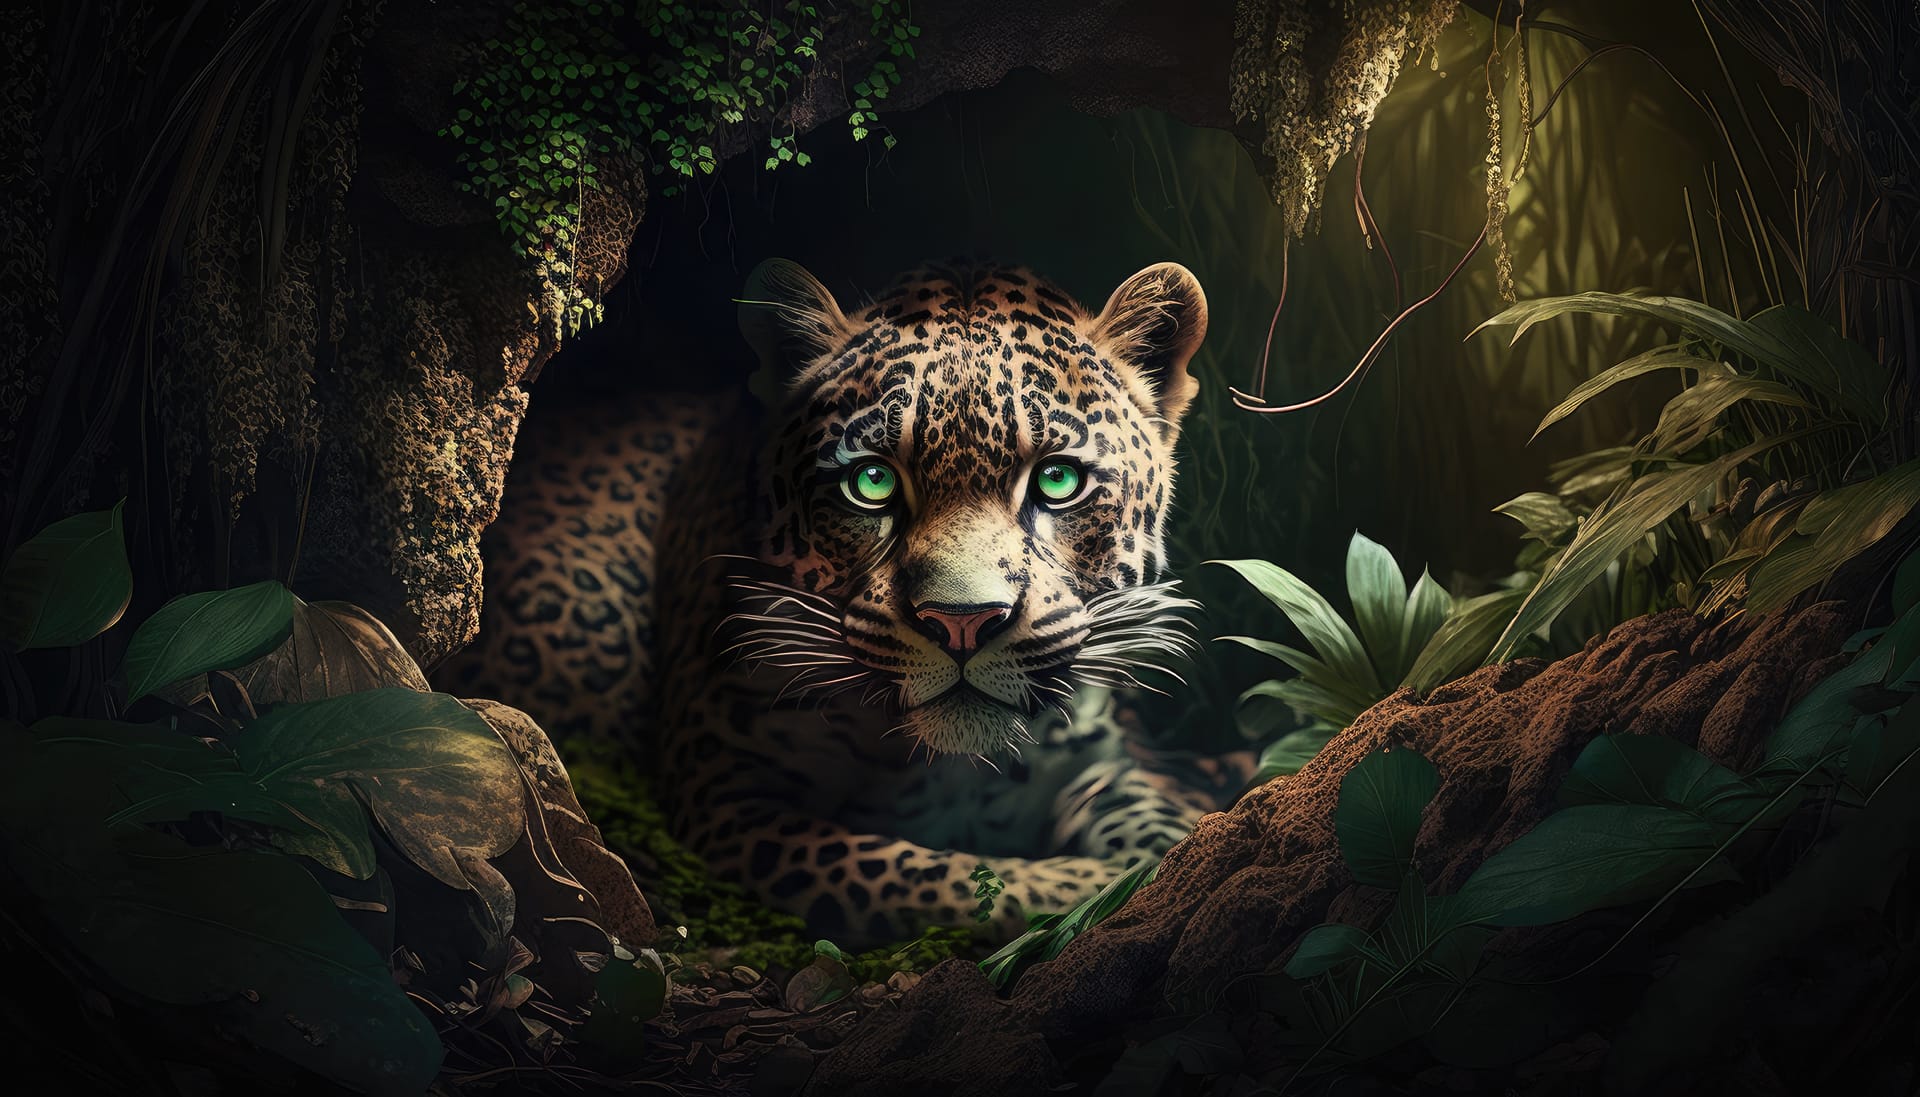 Leopard cave with green eyes